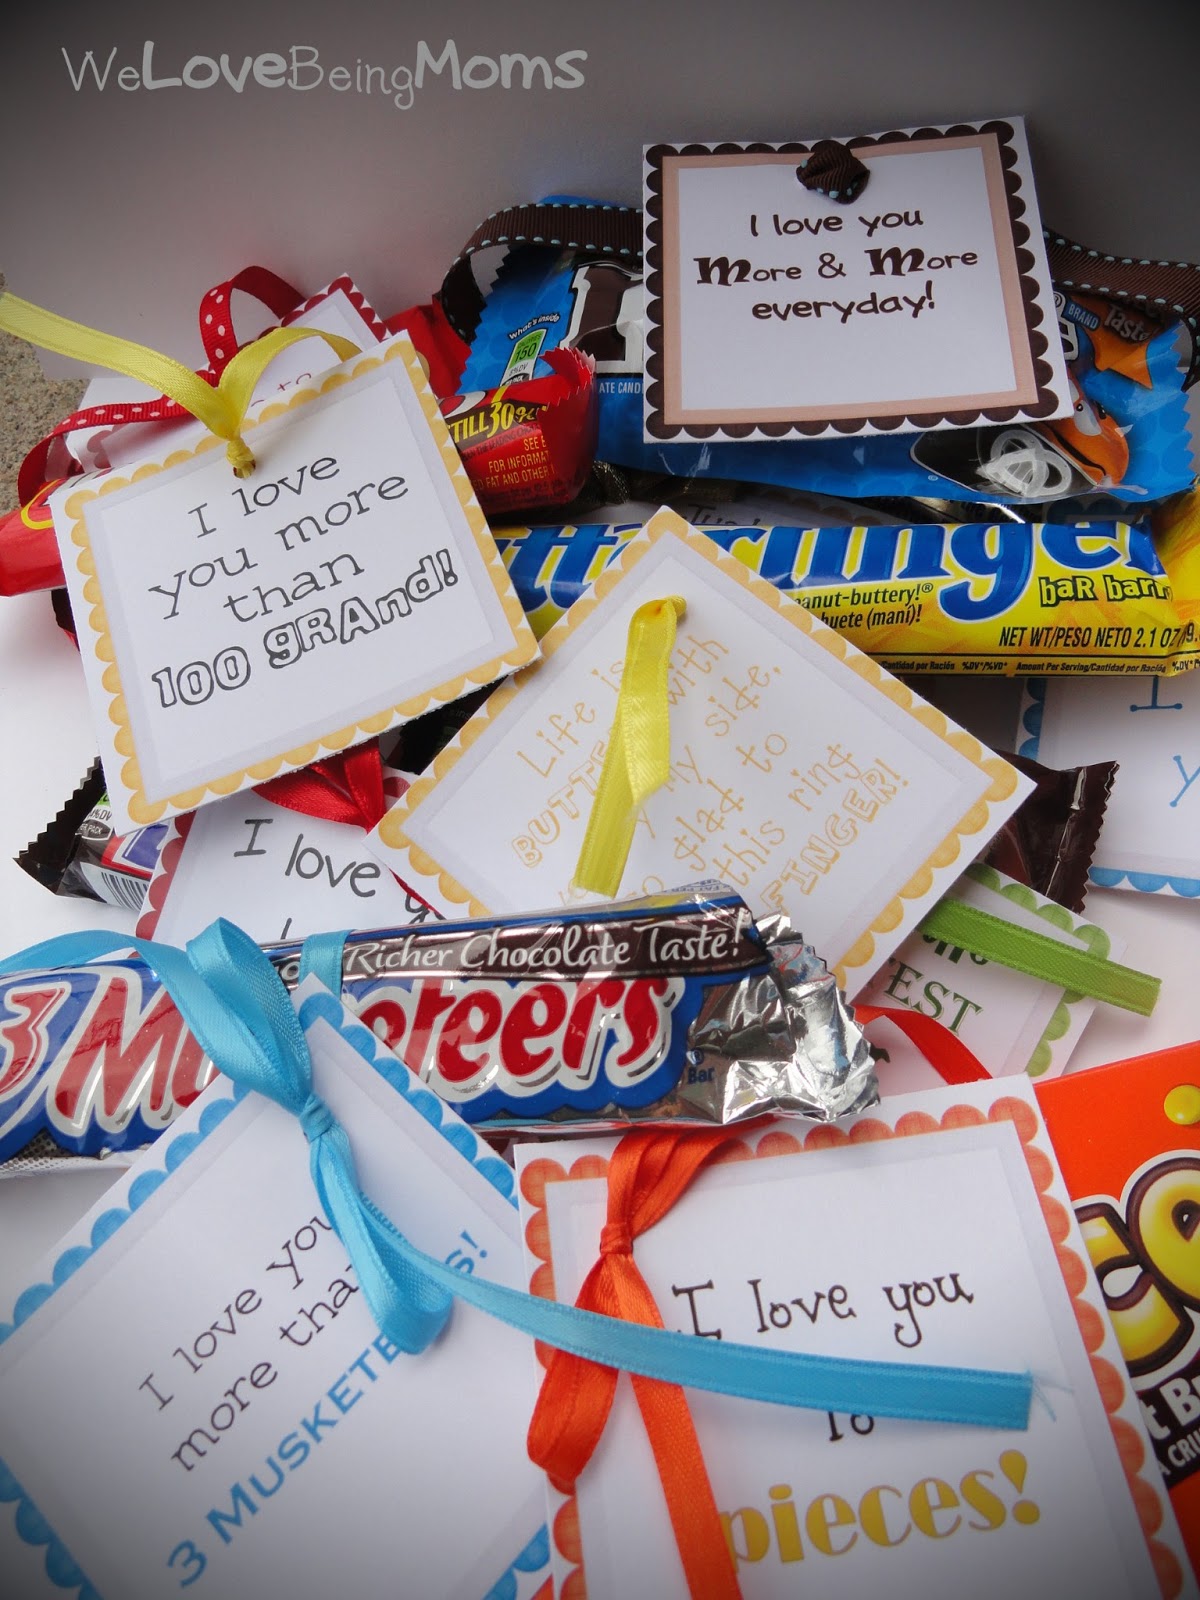 We Love Being Moms!: Candy Bar Printables